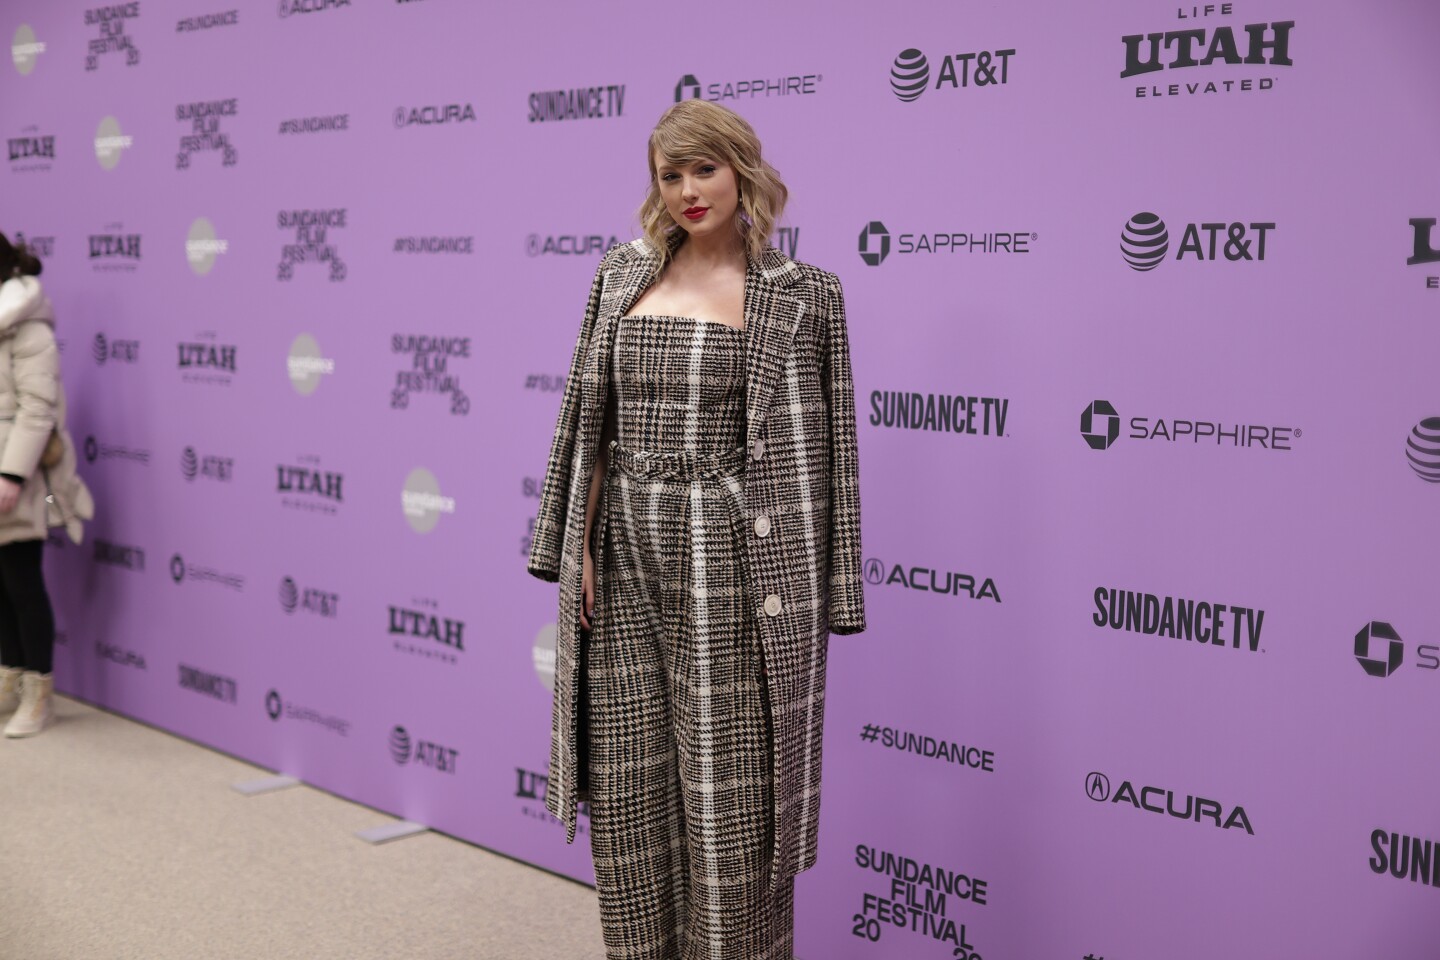 PARK CITY, UTAH - JANUARY 23: Taylor Swift attends the 2020 Sundance Film Festival - "Miss Americana" Premiere at Eccles Center Theatre on January 23, 2020 in Park City, Utah. Credit: Neilson Barnard/Getty Images